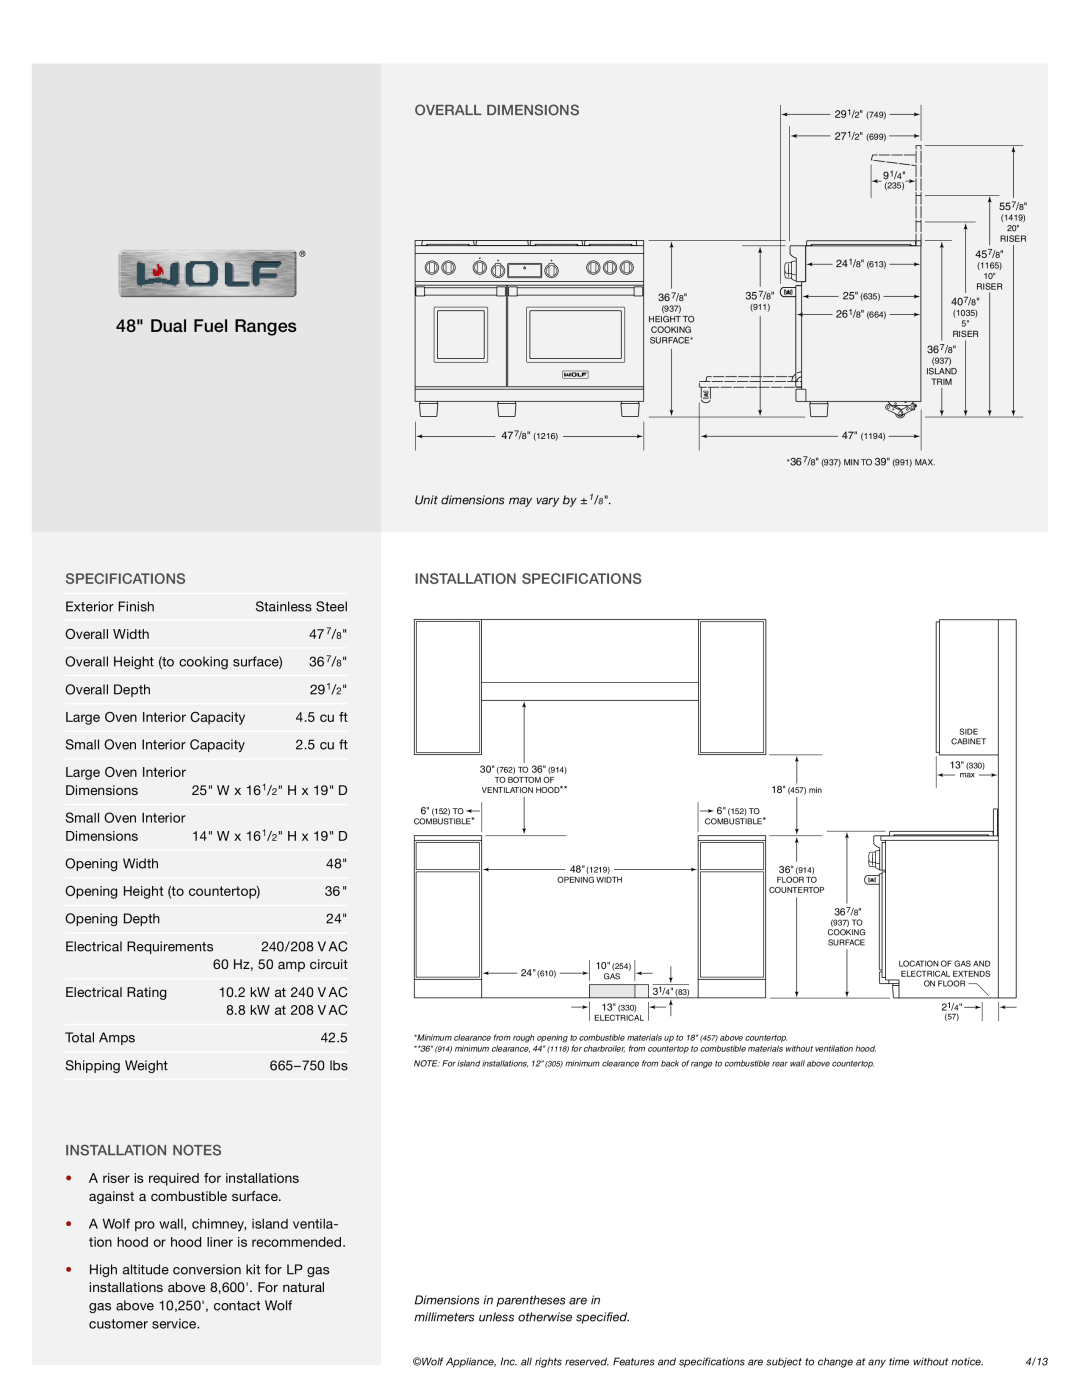 Wolf Appliance Company DF484F Overall Dimensions, Installation Specifications, Installation Notes, Dual Fuel Ranges 